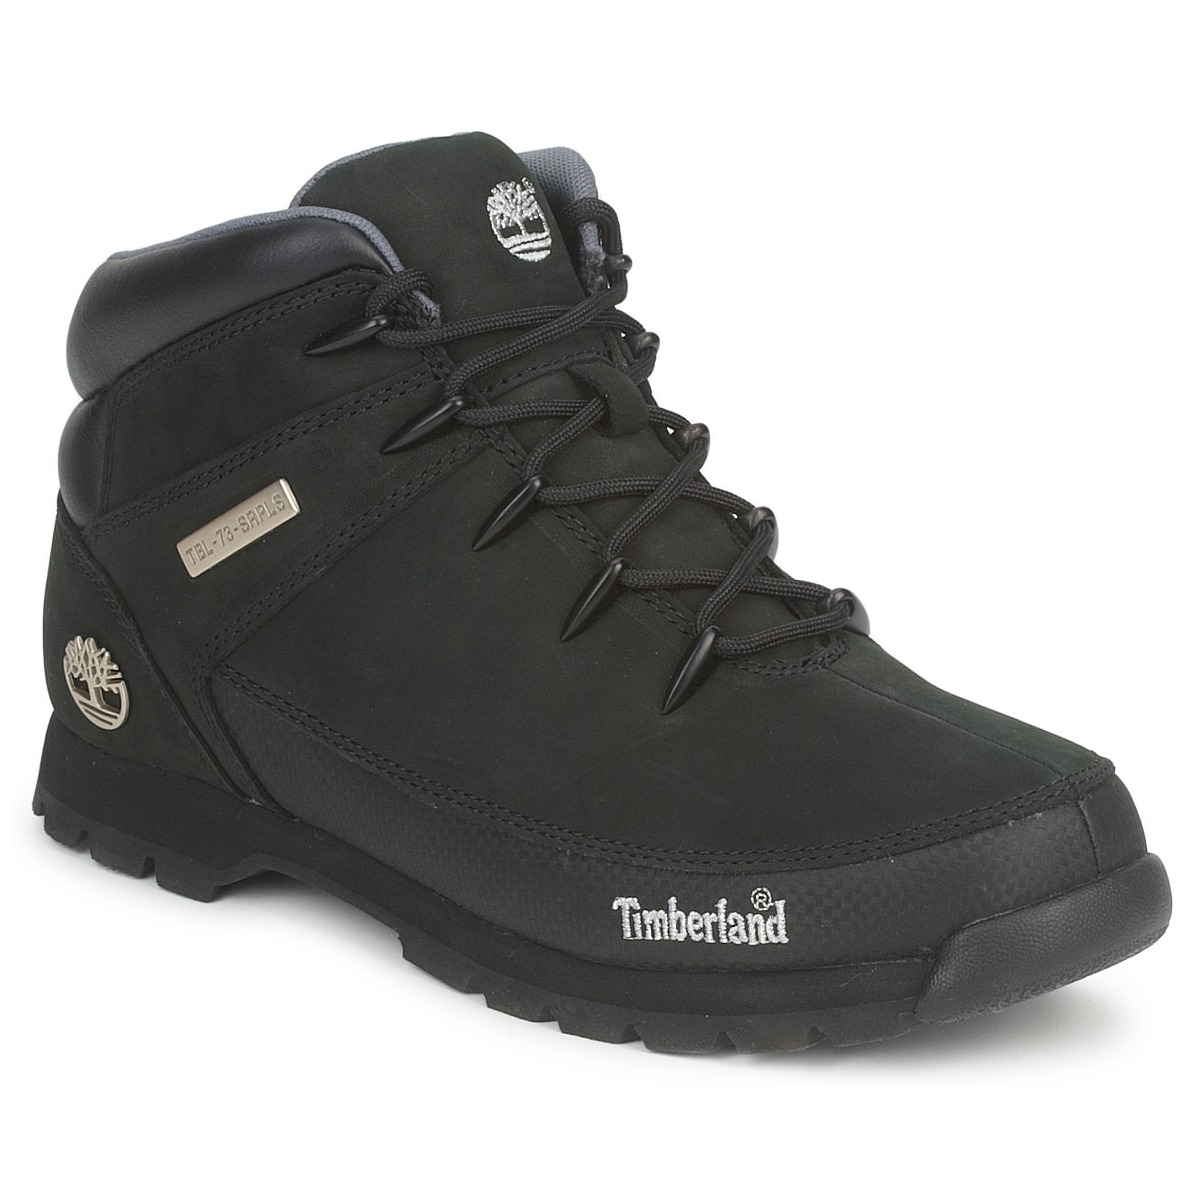 Shoes Men Mid boots Timberland EURO SPRINT HIKER Black